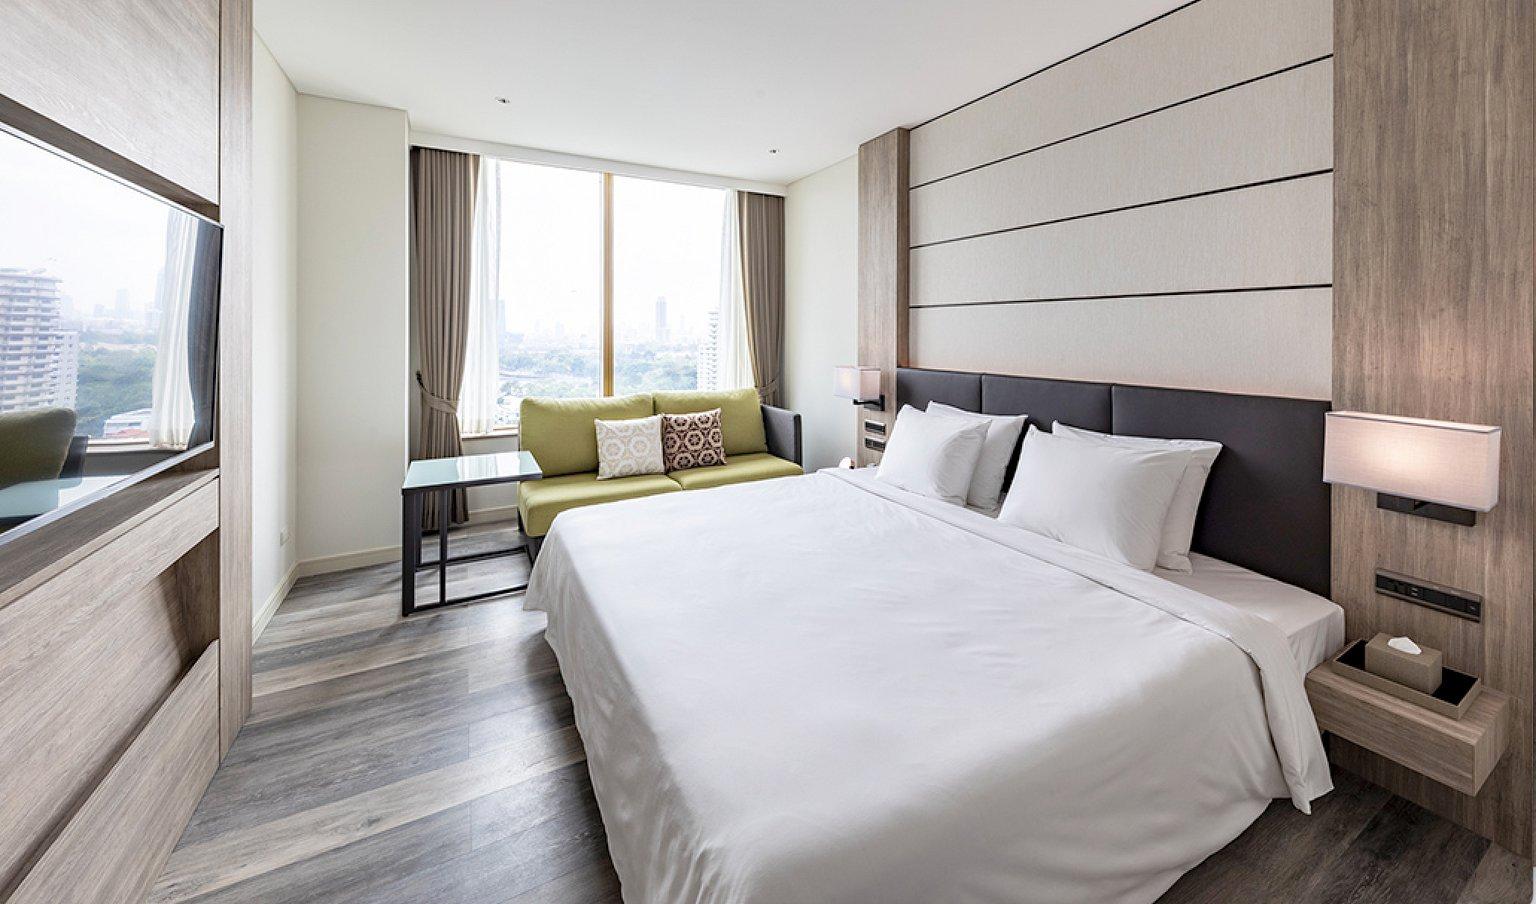 Standard Double - Solaria Nishitetsu Hotel Bangkok *Special offer available until 4/30 reservation!